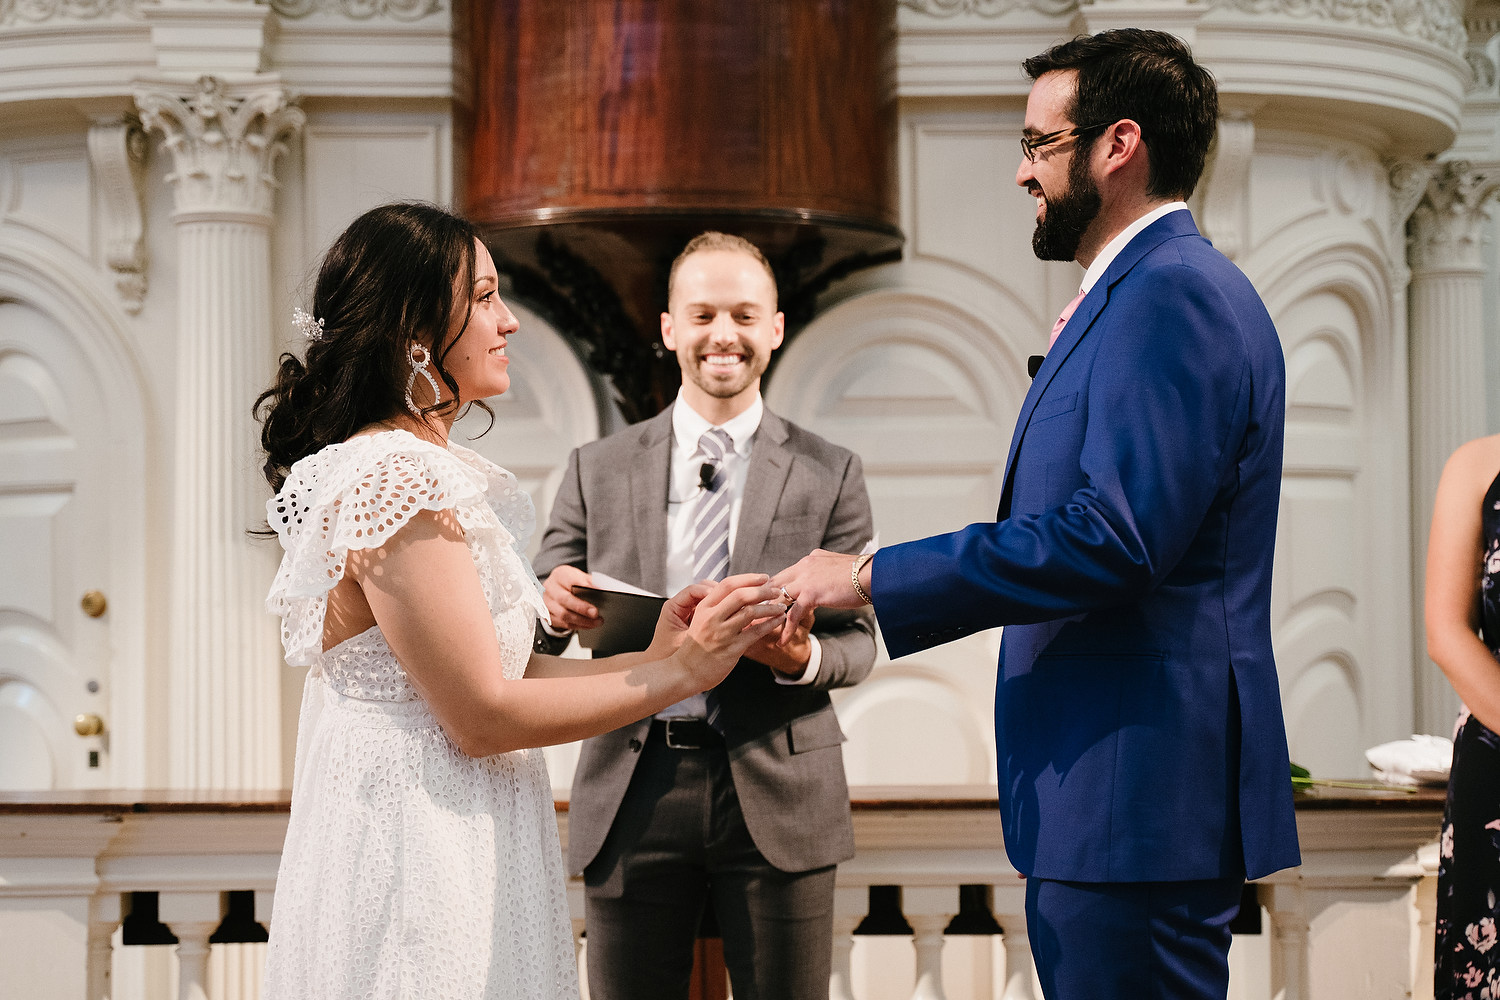 Boston Old South Meeting House wedding photo session 15